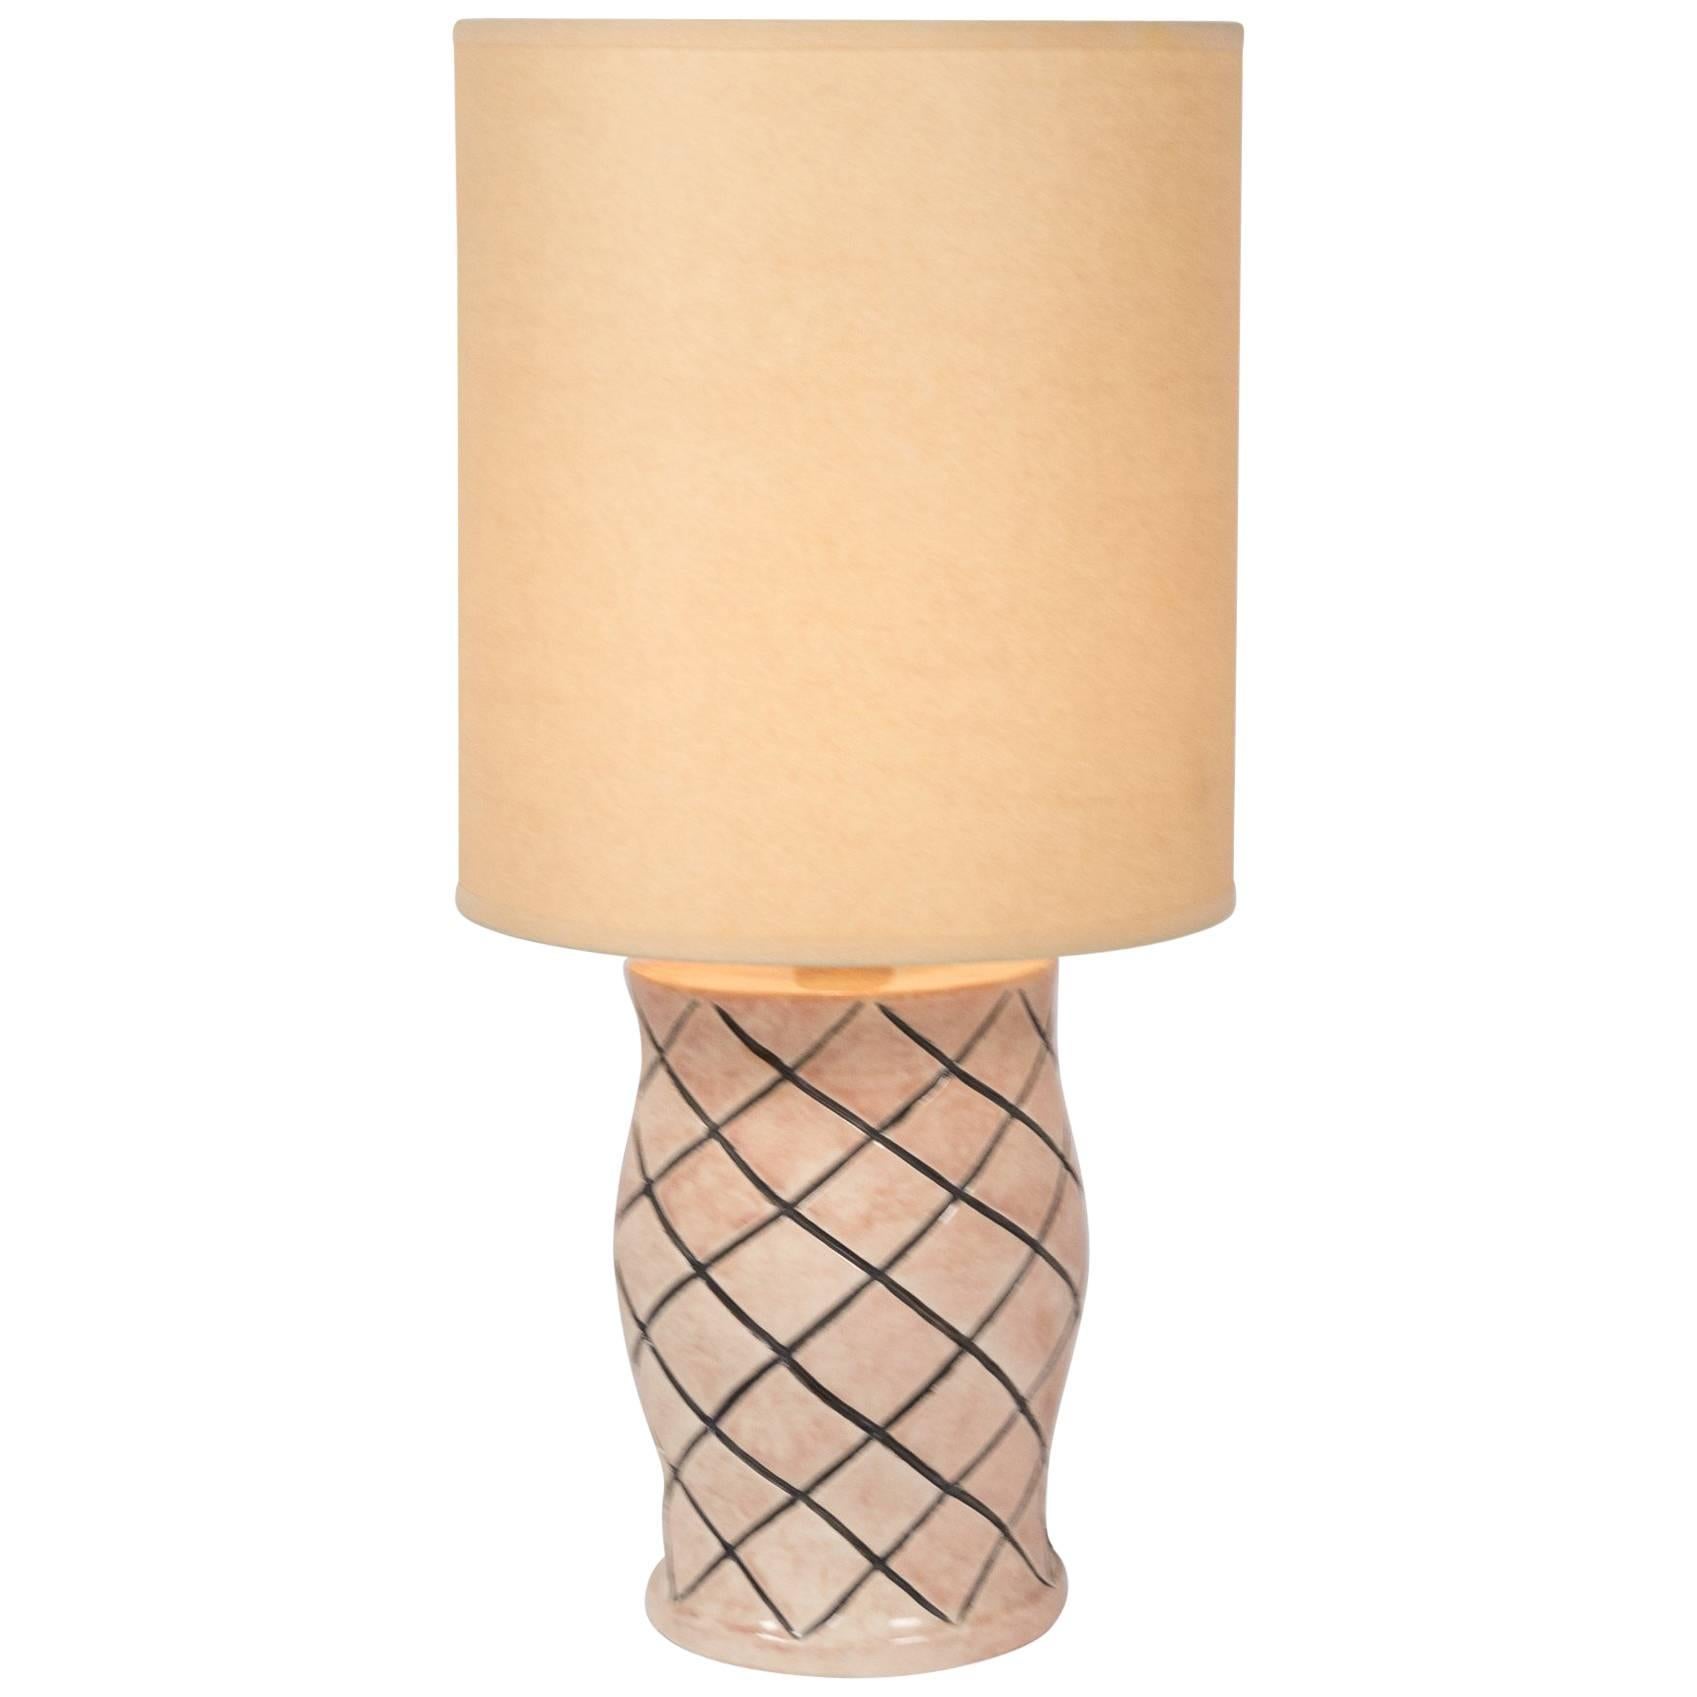 Crosshatch Glazed Ceramic Table Lamp, French, 1930s For Sale